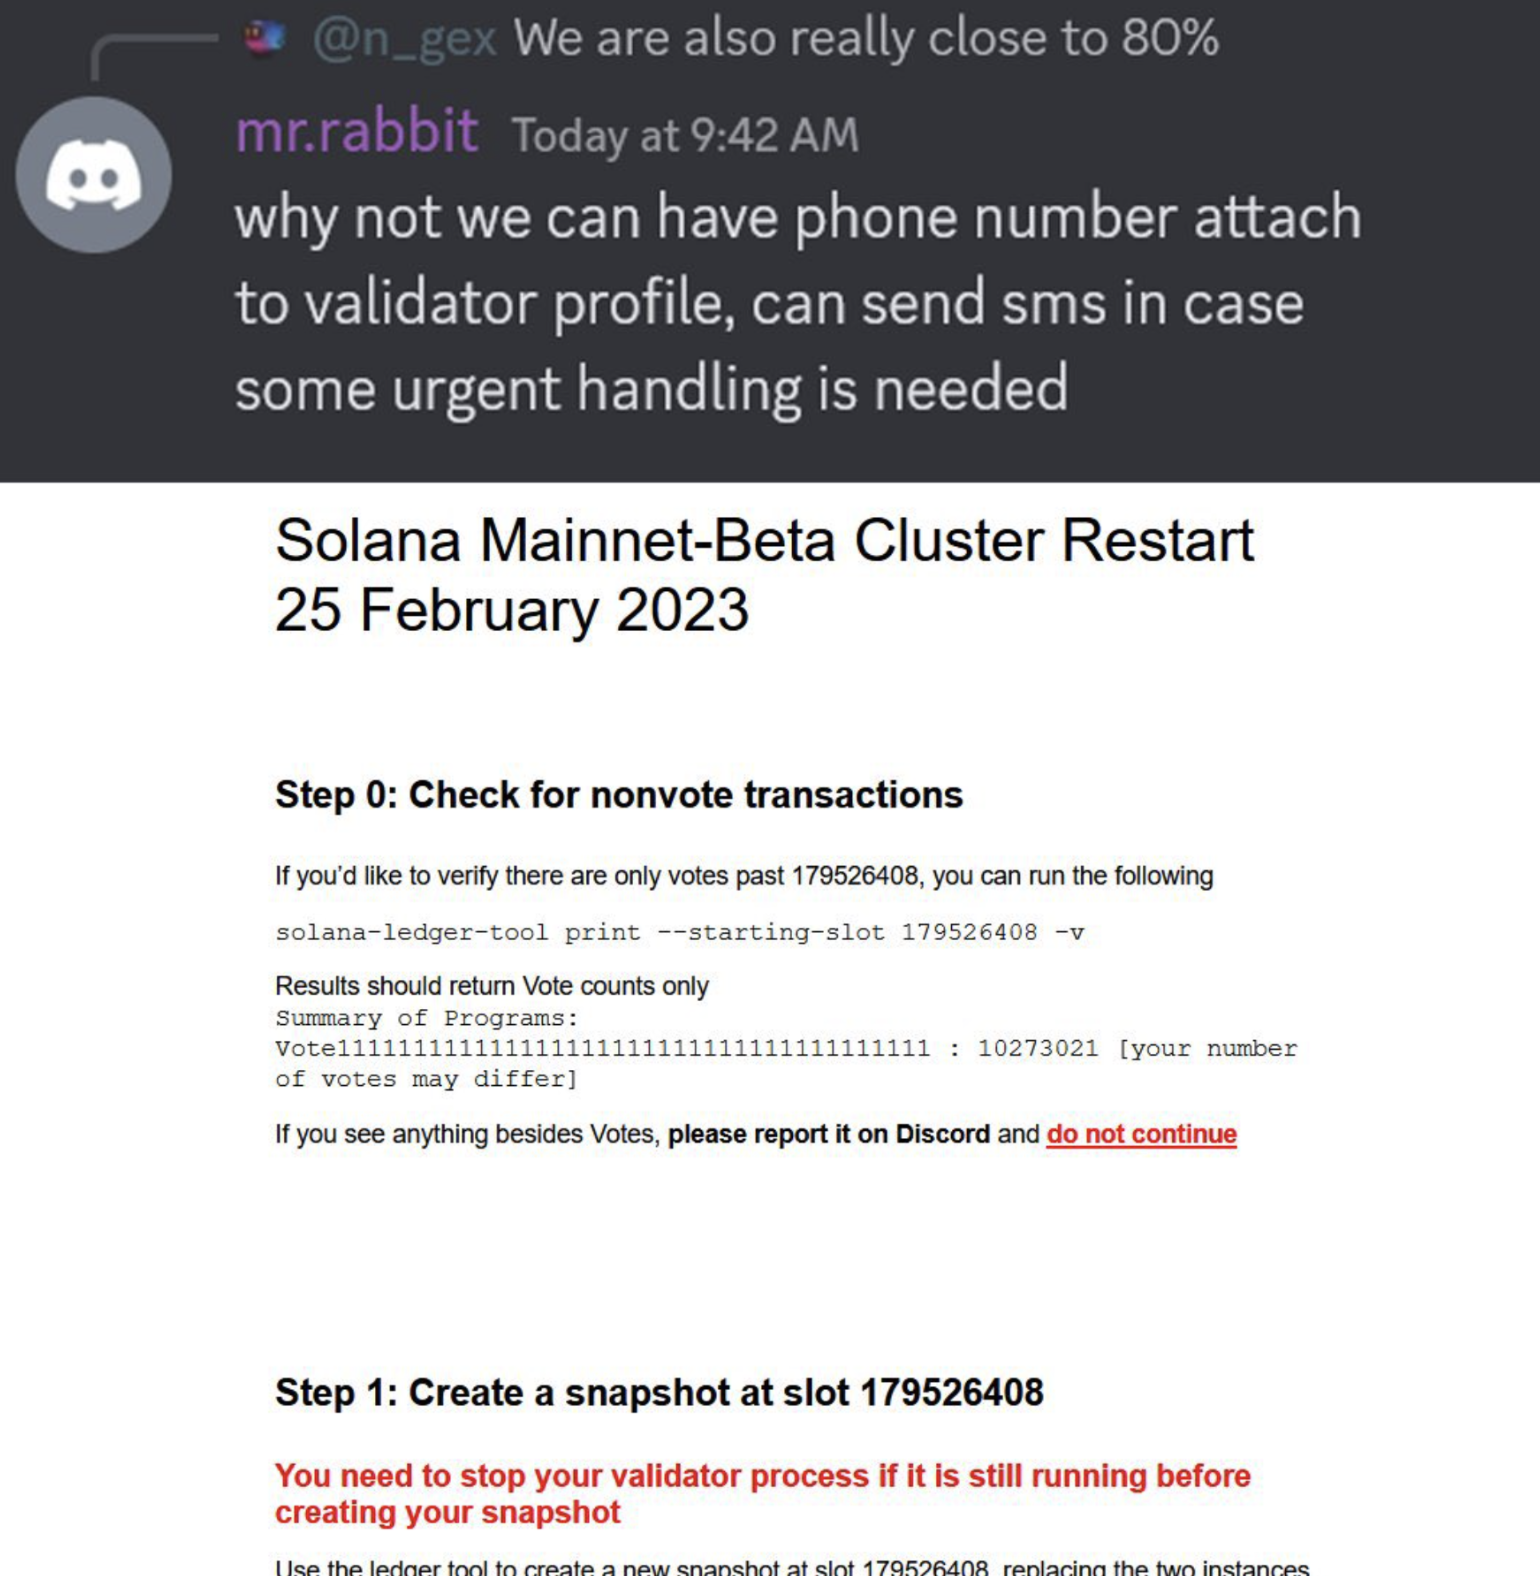 Solana network tackling an outage